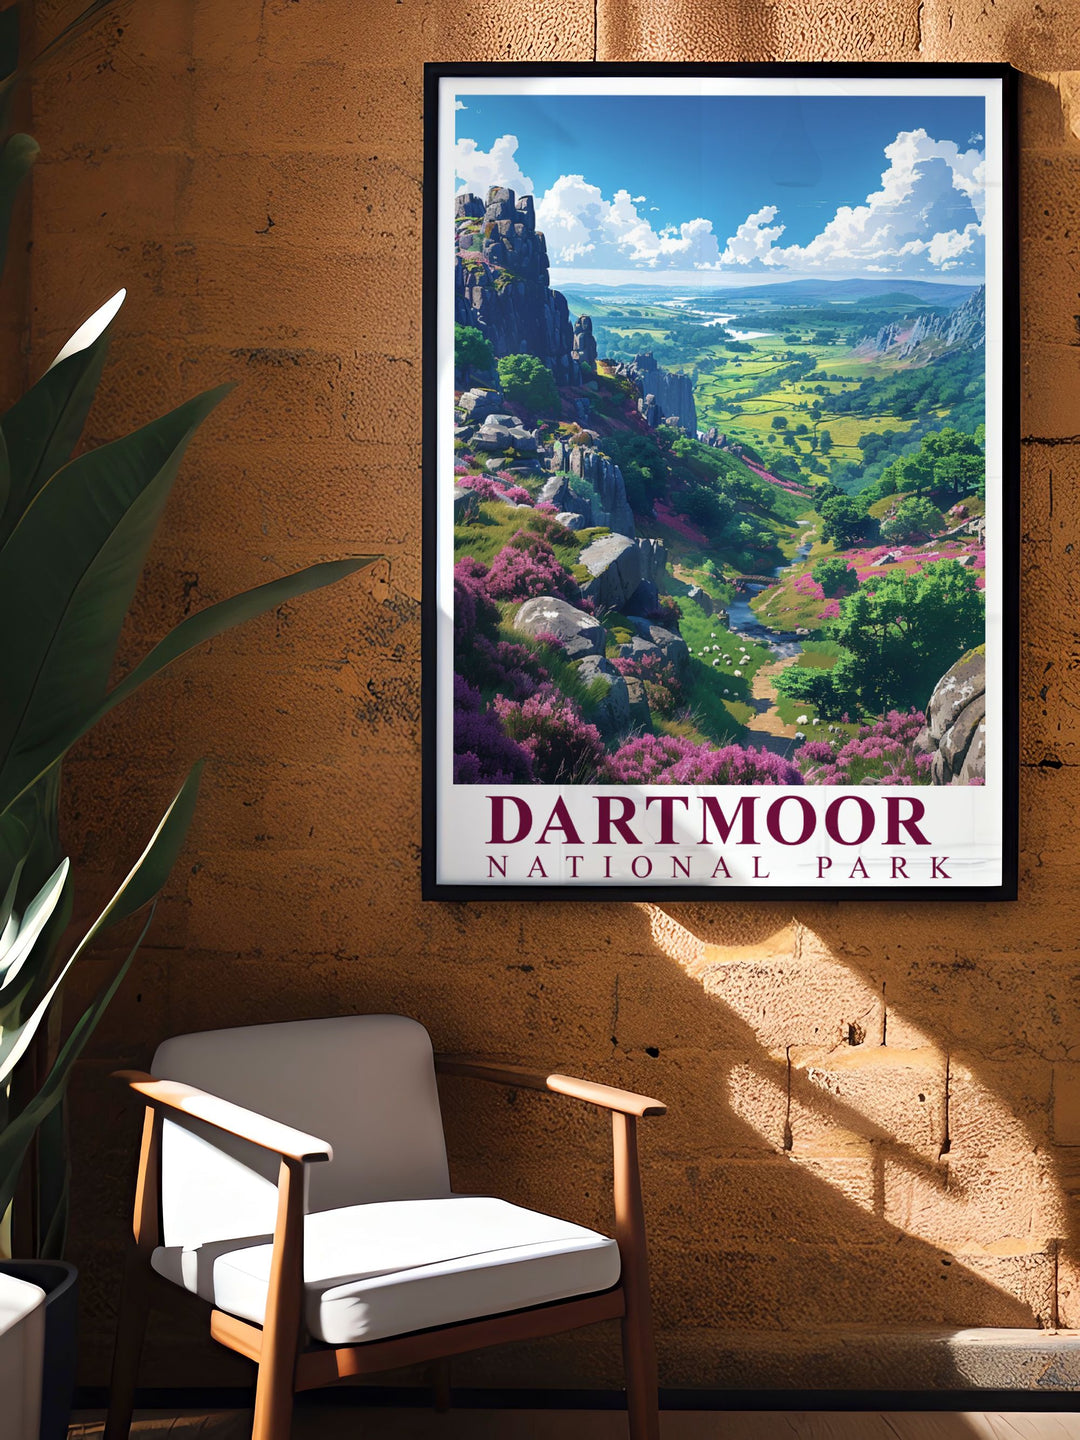 Gallery wall art illustrating the unique landscapes of Dartmoor, with its iconic tors and free roaming ponies, capturing the essence of Englands national park.